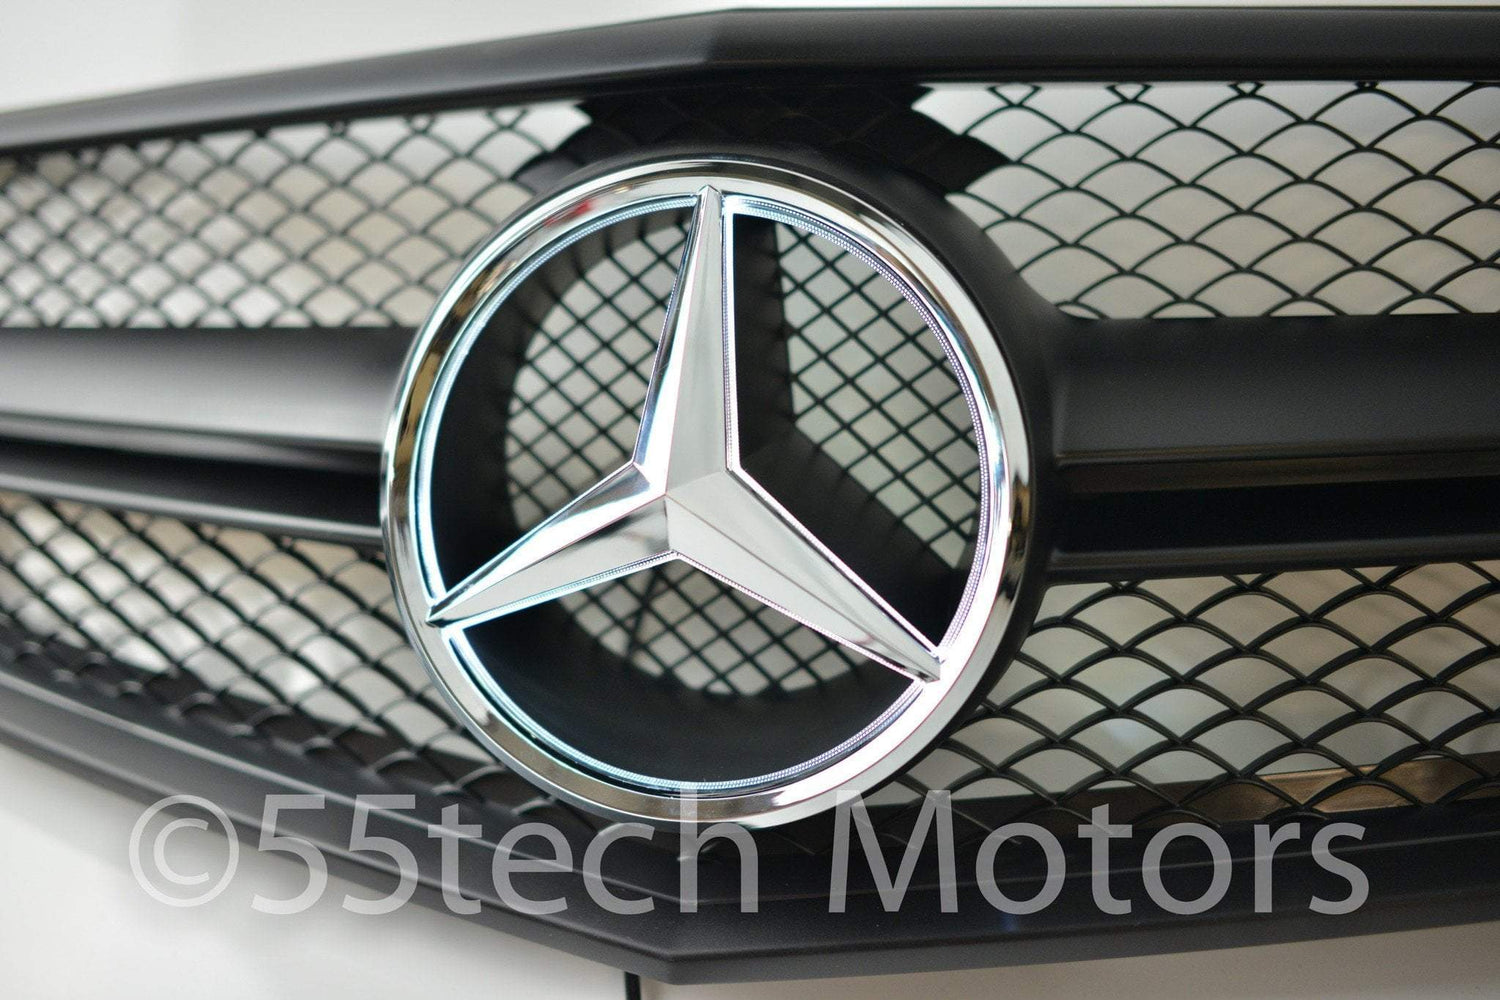 Mercedes Benz W212 E-Class 1 Fin Style Grille with Illuminated LED light Star - 55tech Motors